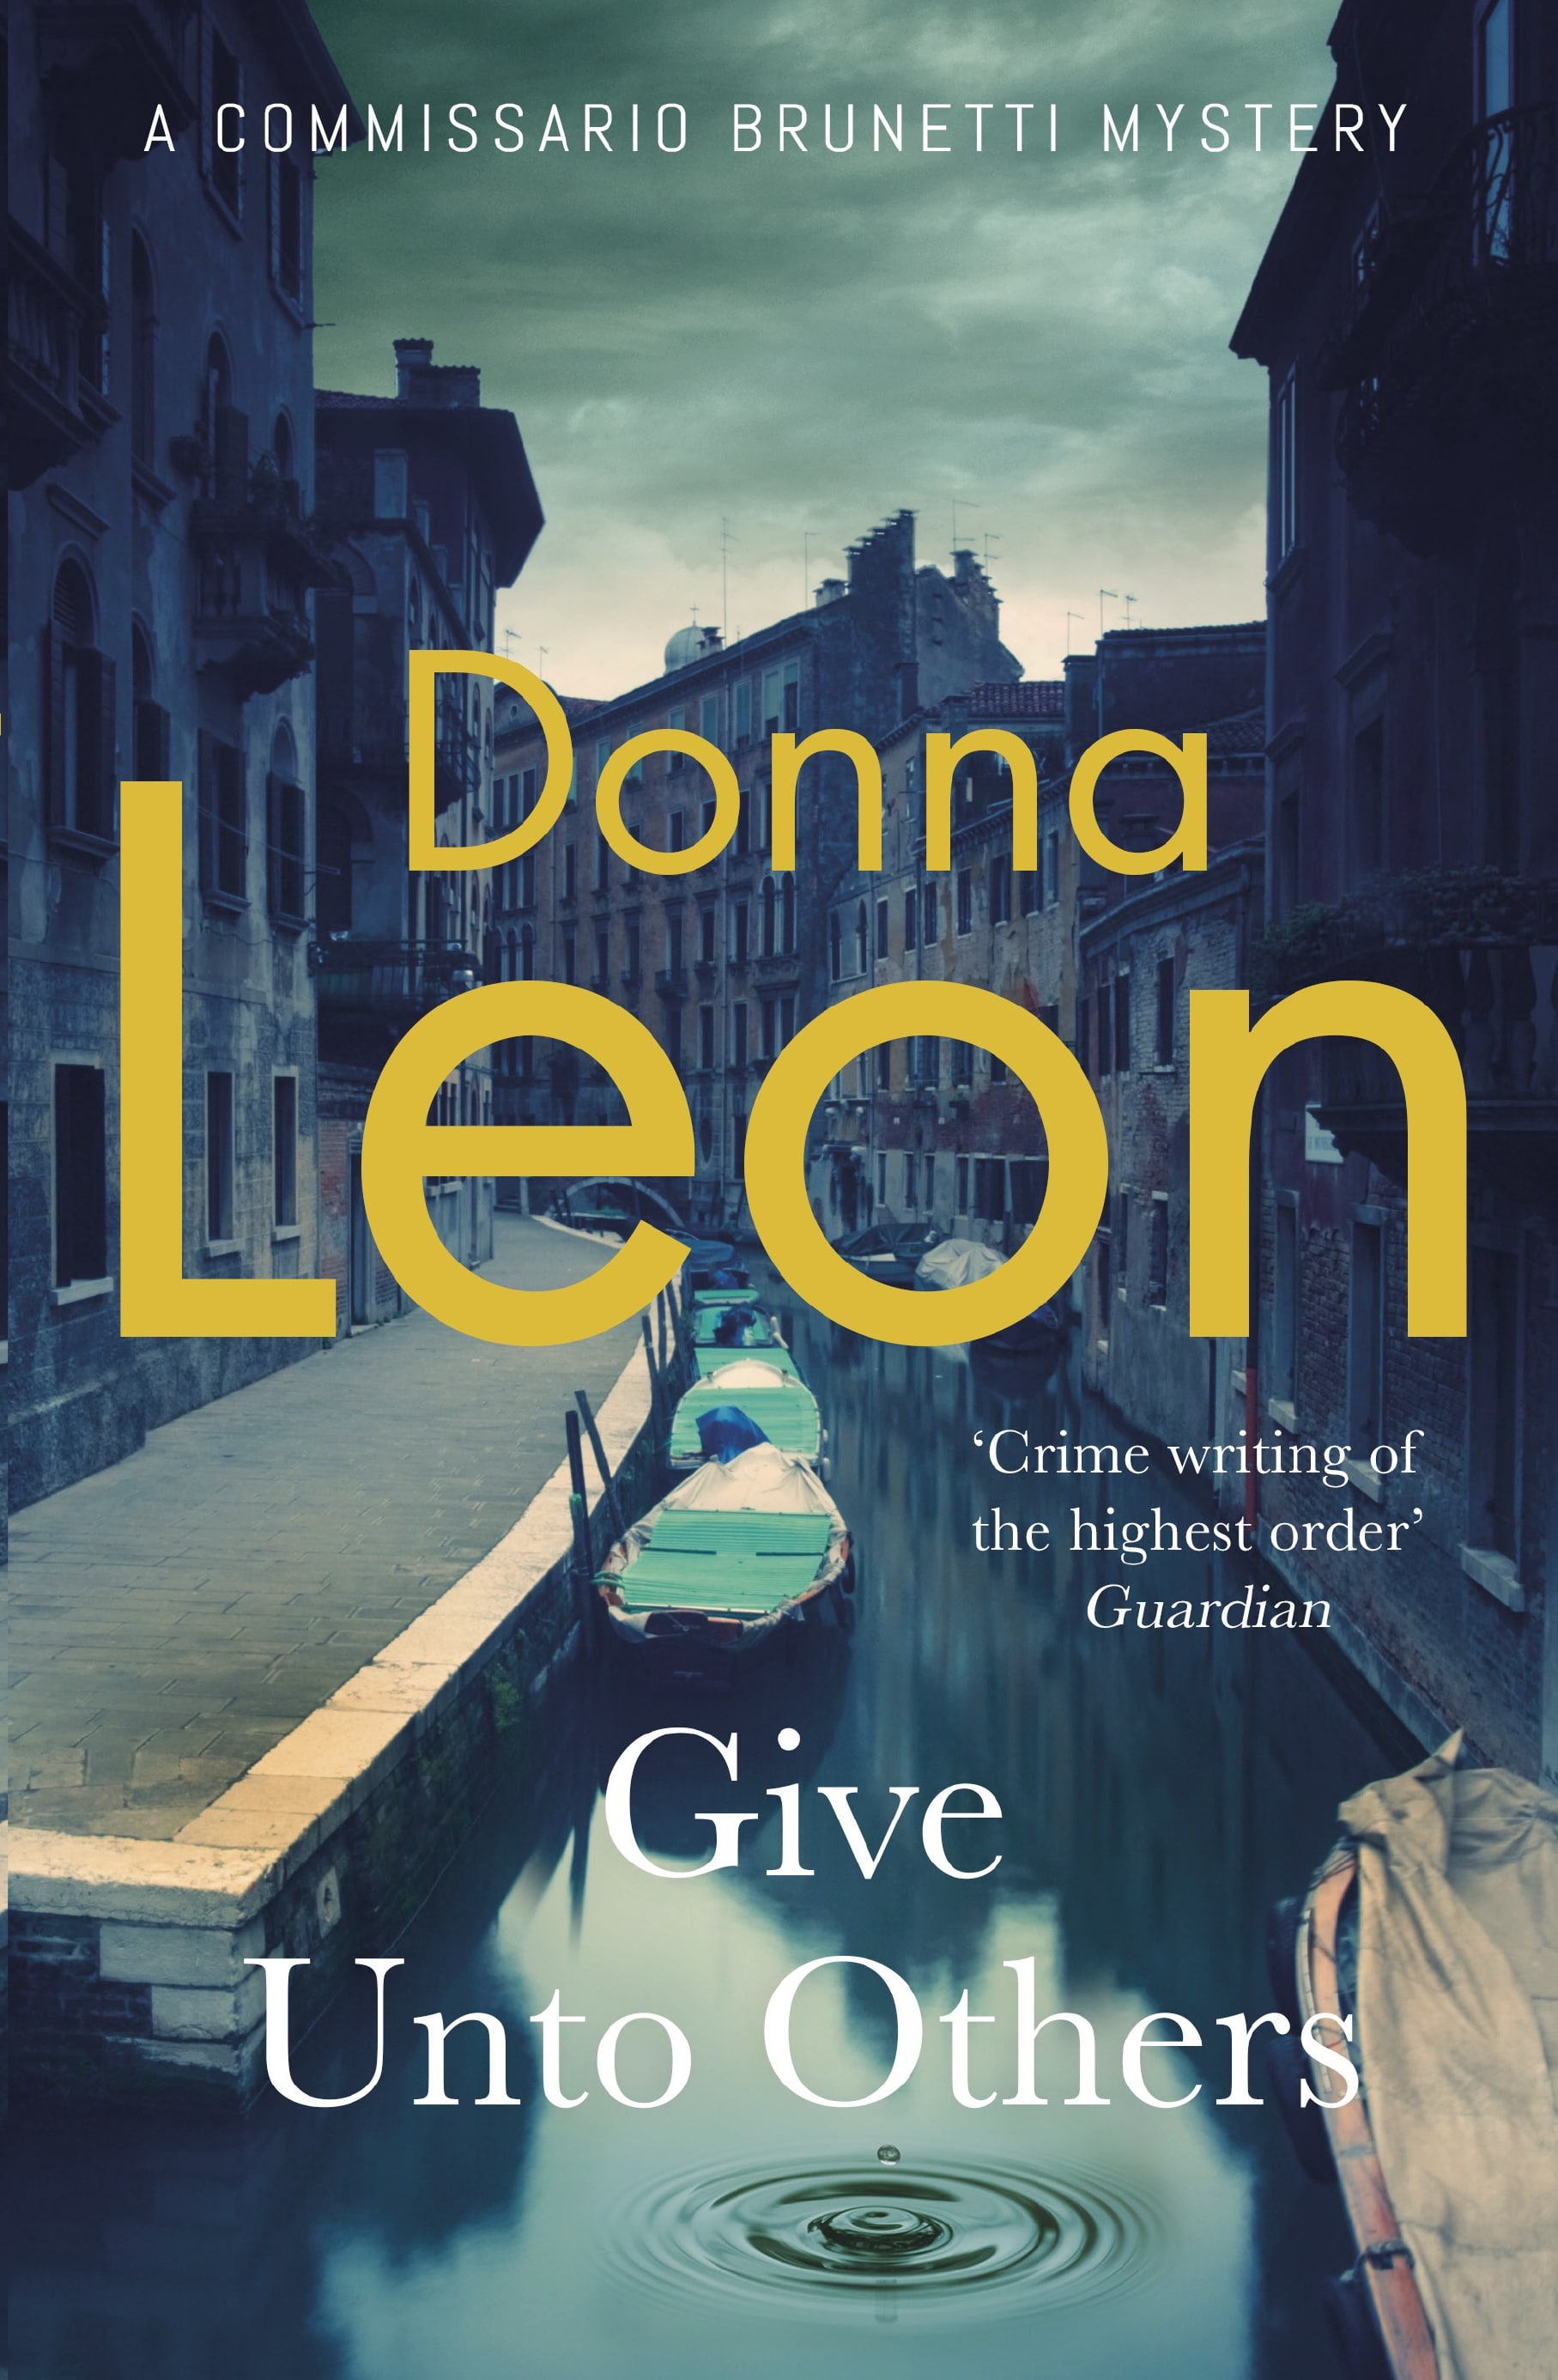 Book cover of Give Unto Others by Donna Leon, book 31 in the Commissario Brunetti series